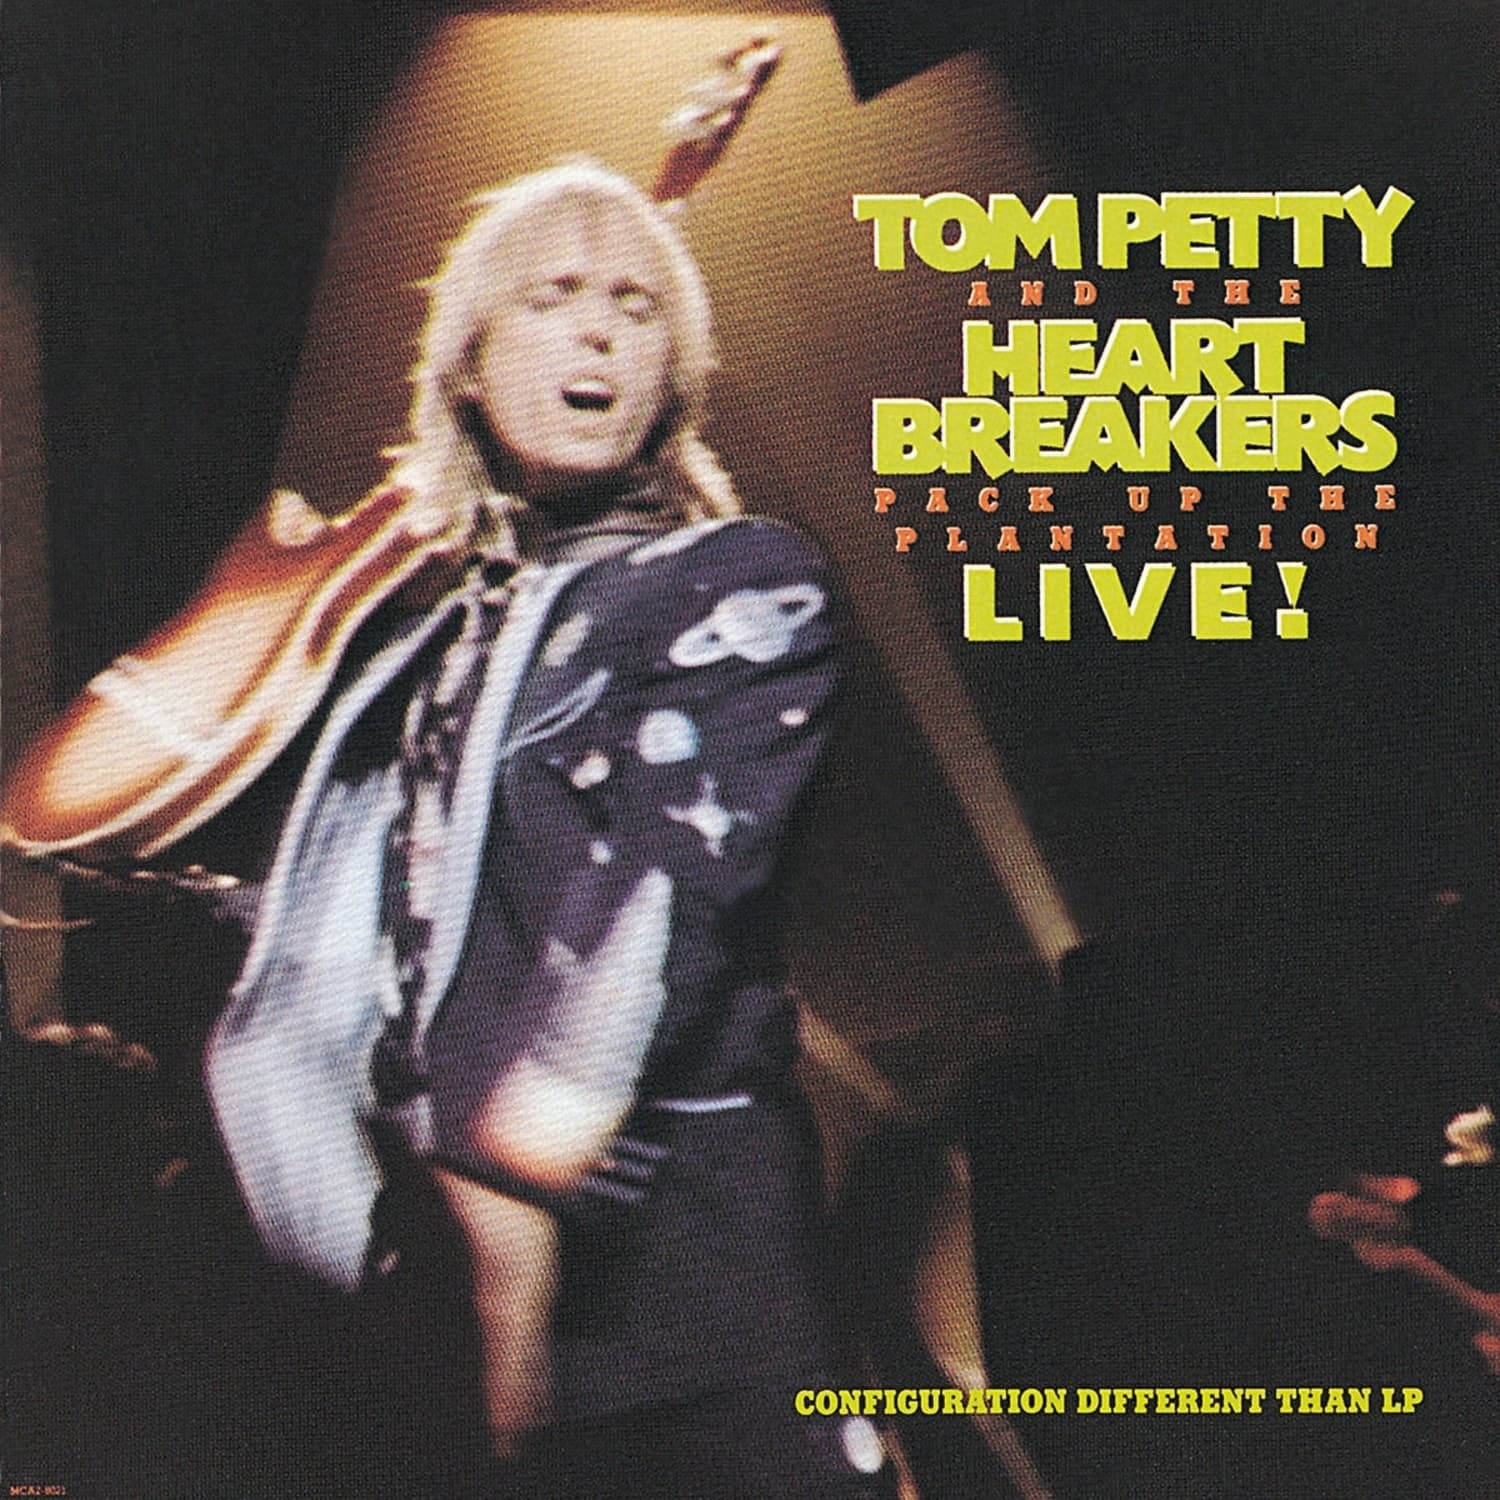 Tom Petty & The Heartbreakers - PACK UP THE PLANTATION LIVE! 